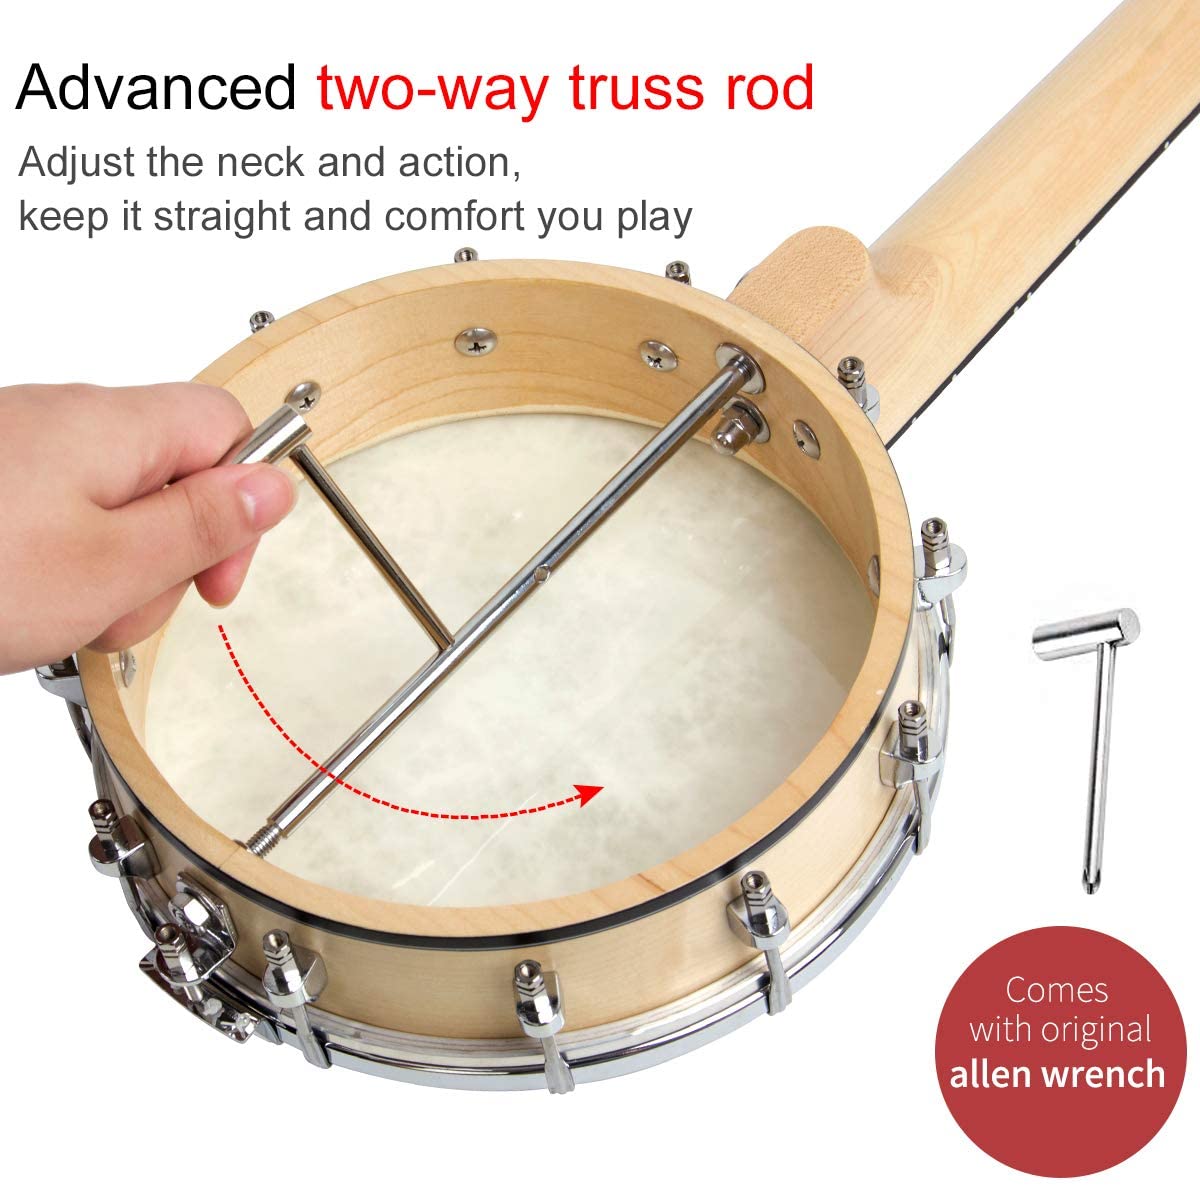 AKLOT Banjo Ukulele Concert 23 inch Remo Drumhead Open Back Maple Body 15:1 Advanced Tuner with Two Way Truss Rod Gig Bag Tuner String Strap Picks - AKLOT